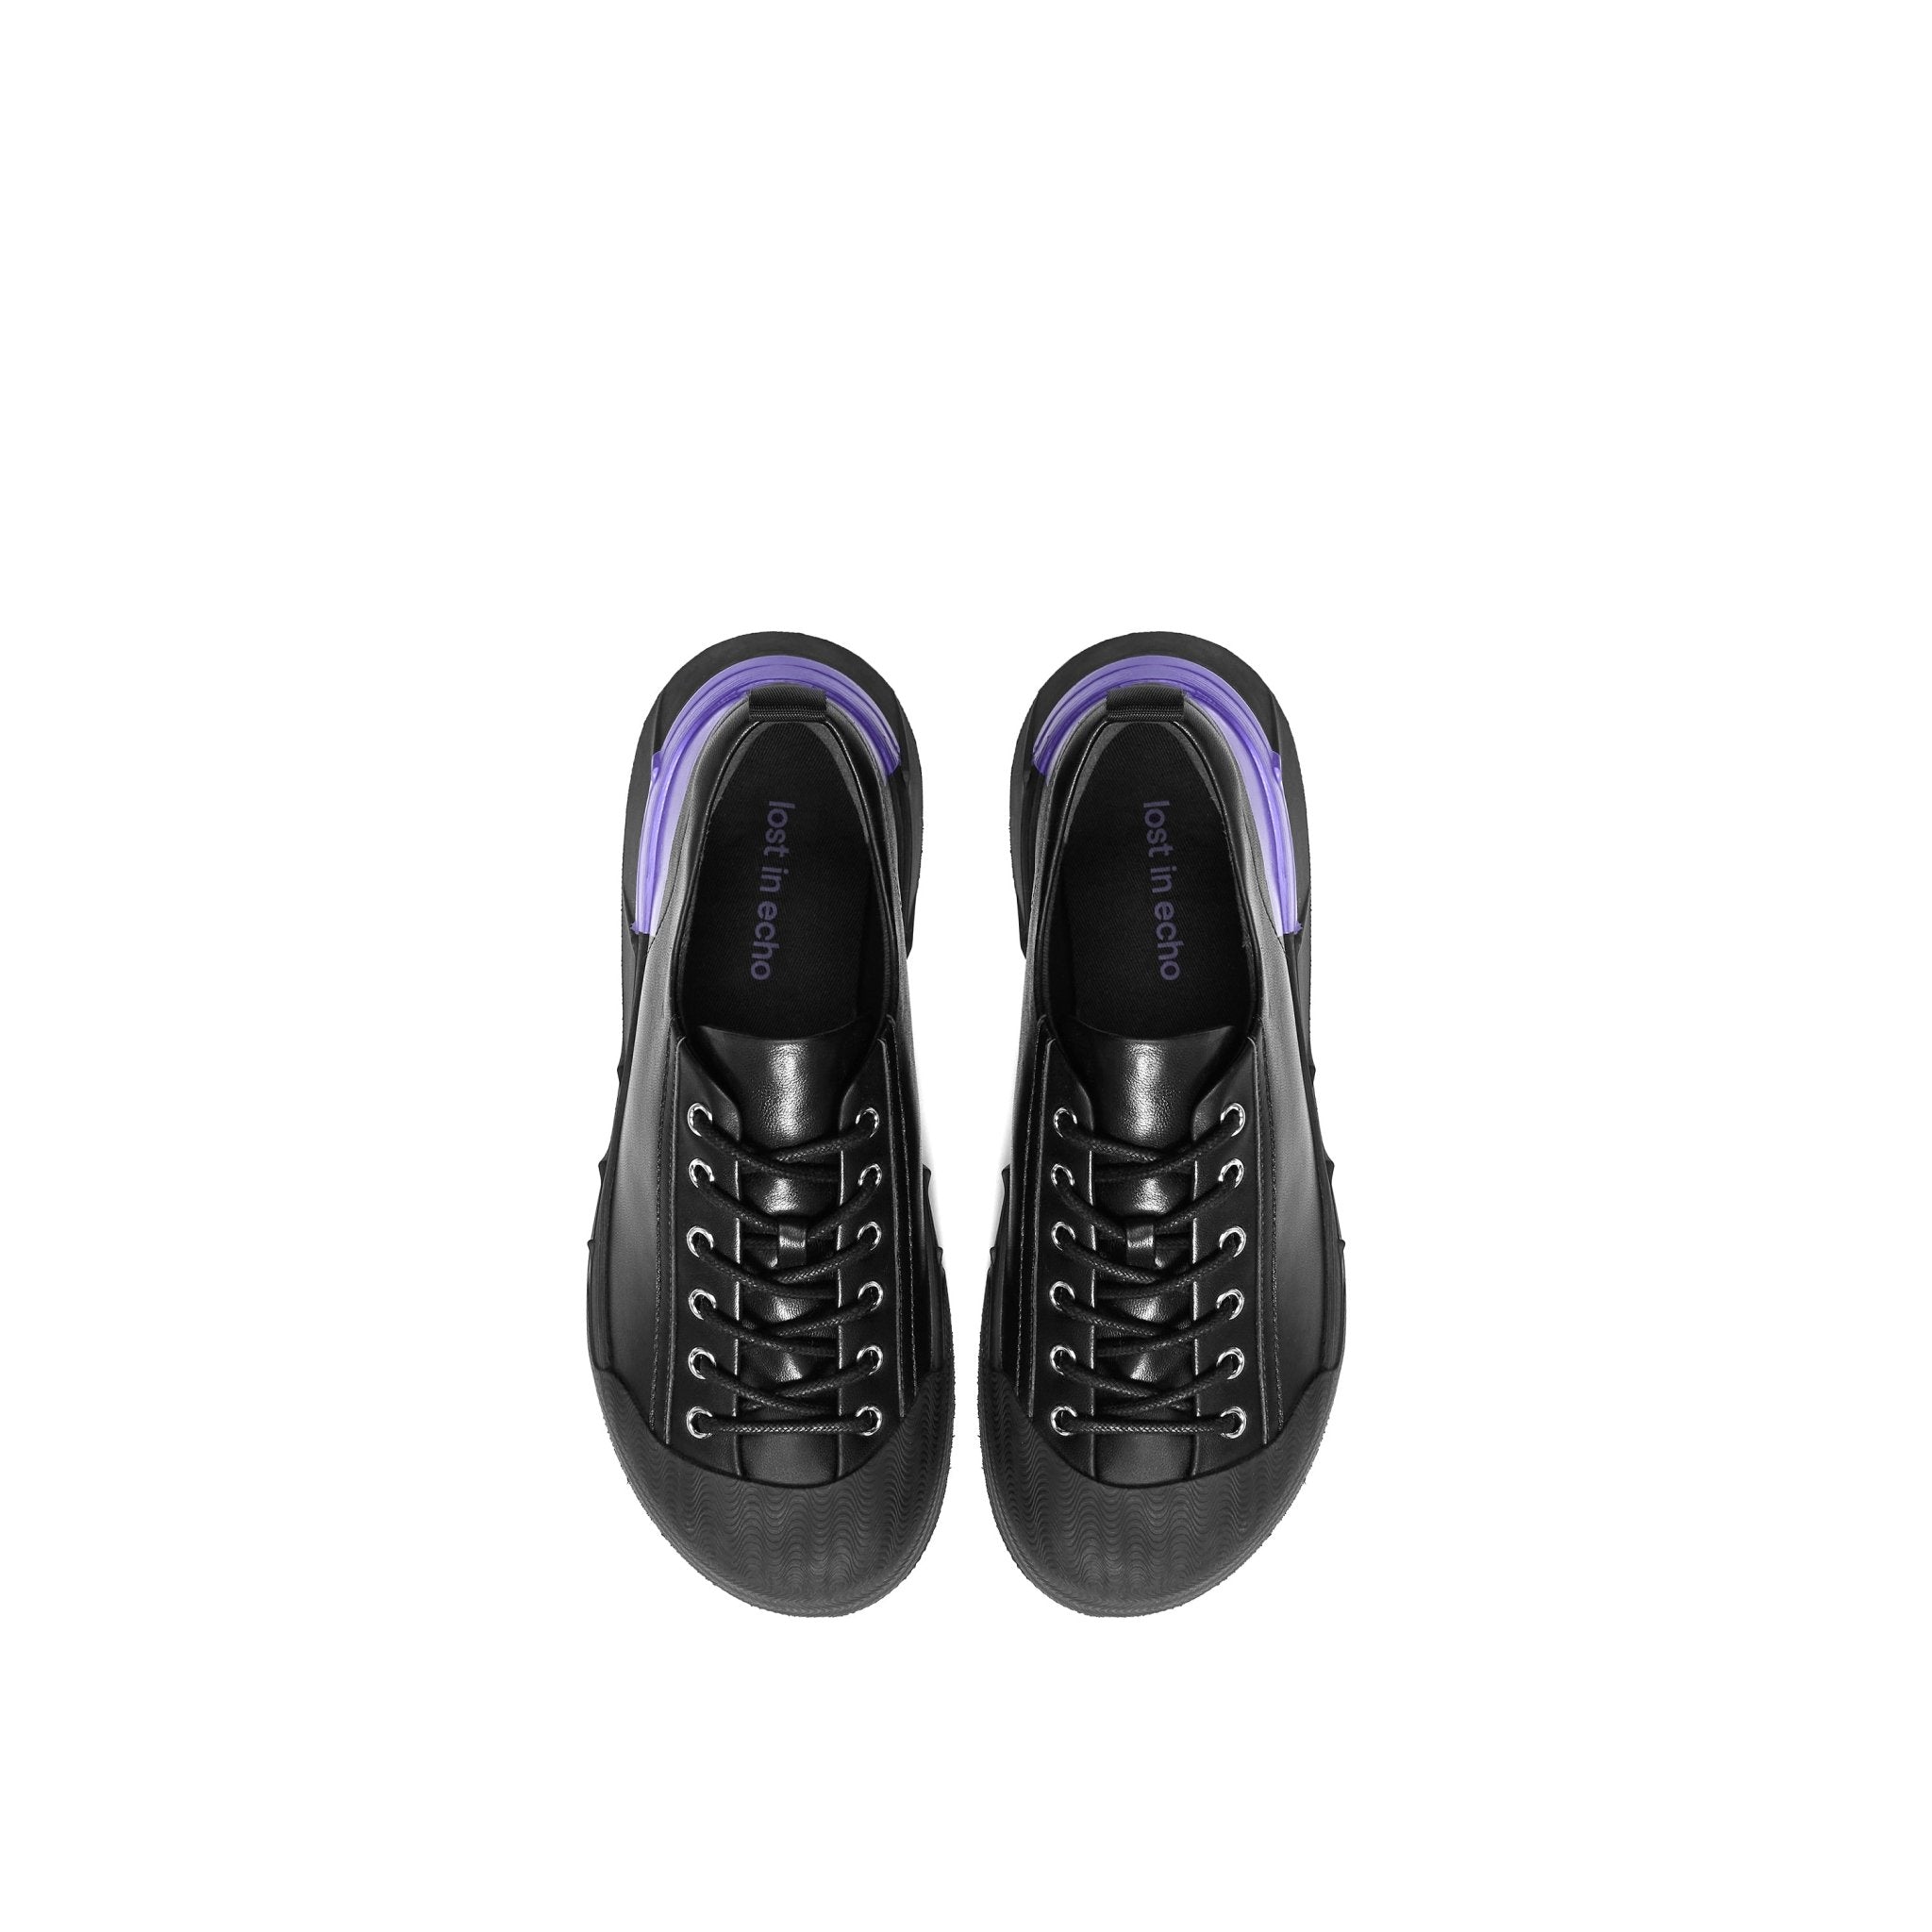 LOST IN ECHO Black Irregular Three-dimensional Printing Casual Shoes | MADA IN CHINA